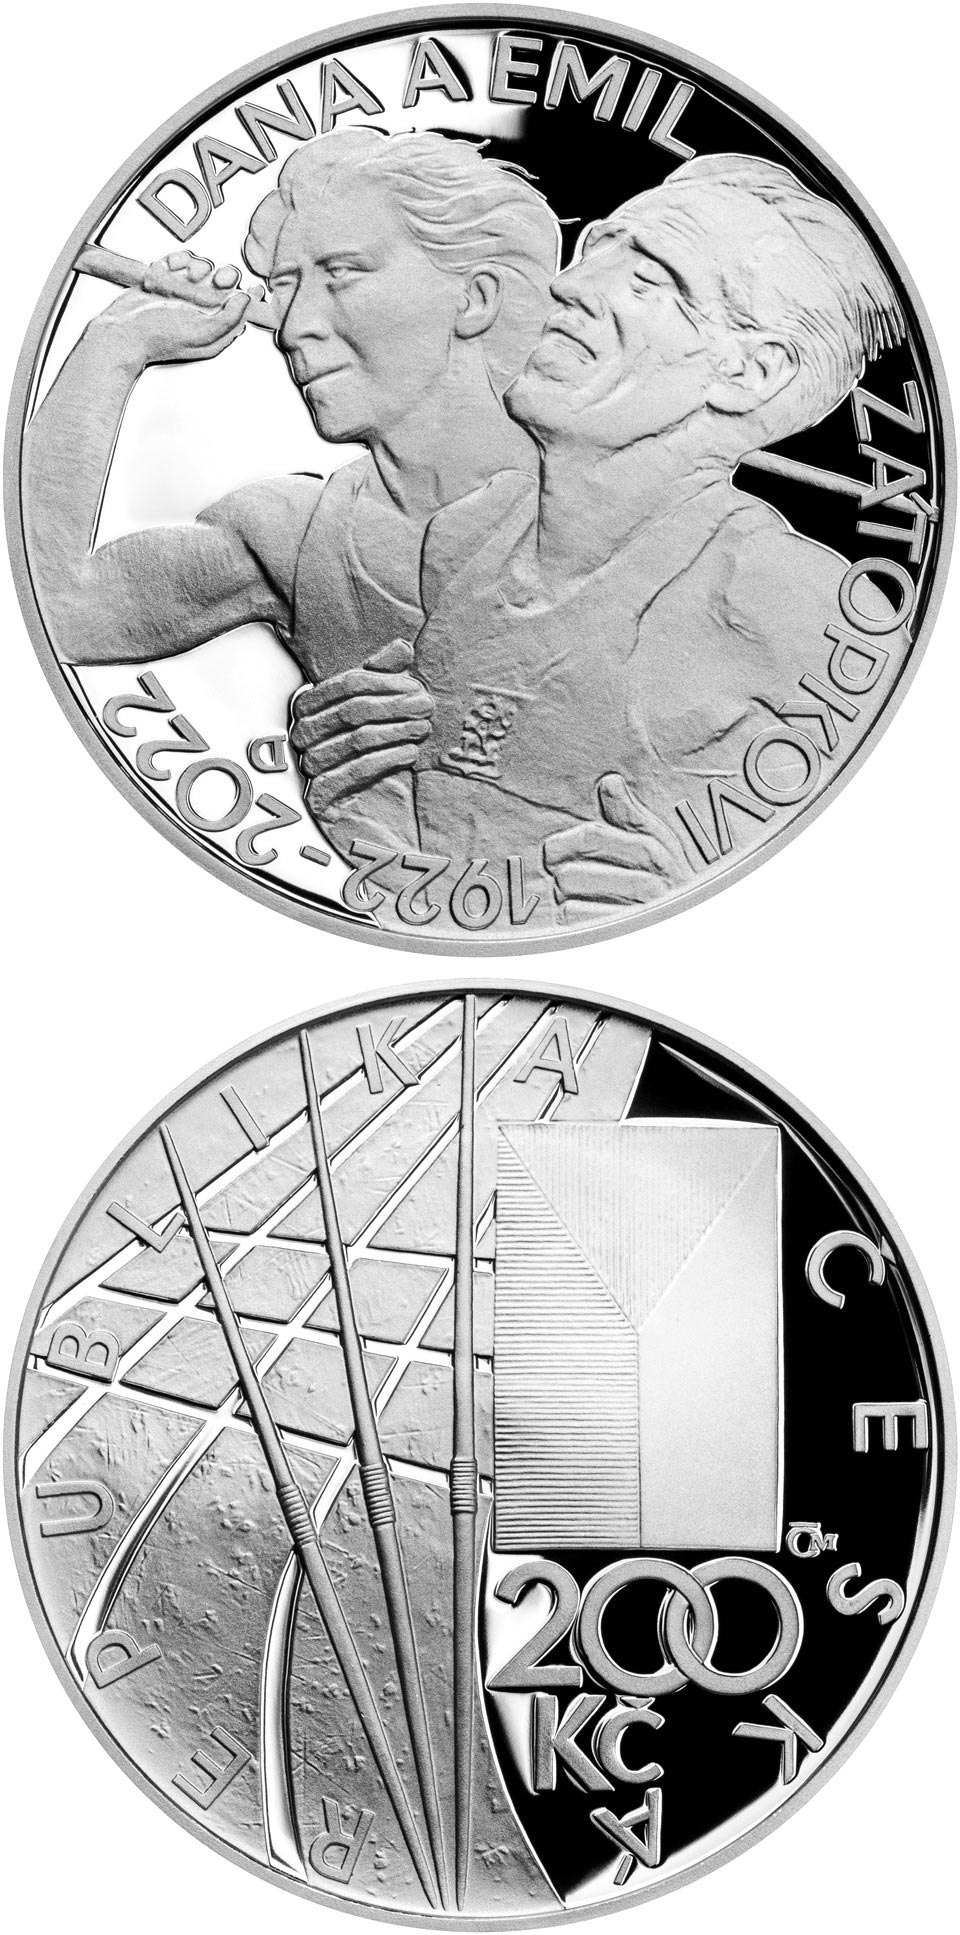 Image of 200 koruna coin - 100th Anniversary of the Birth of Dana Zátopková and Emil Zátopek | Czech Republic 2022.  The Silver coin is of Proof, BU quality.